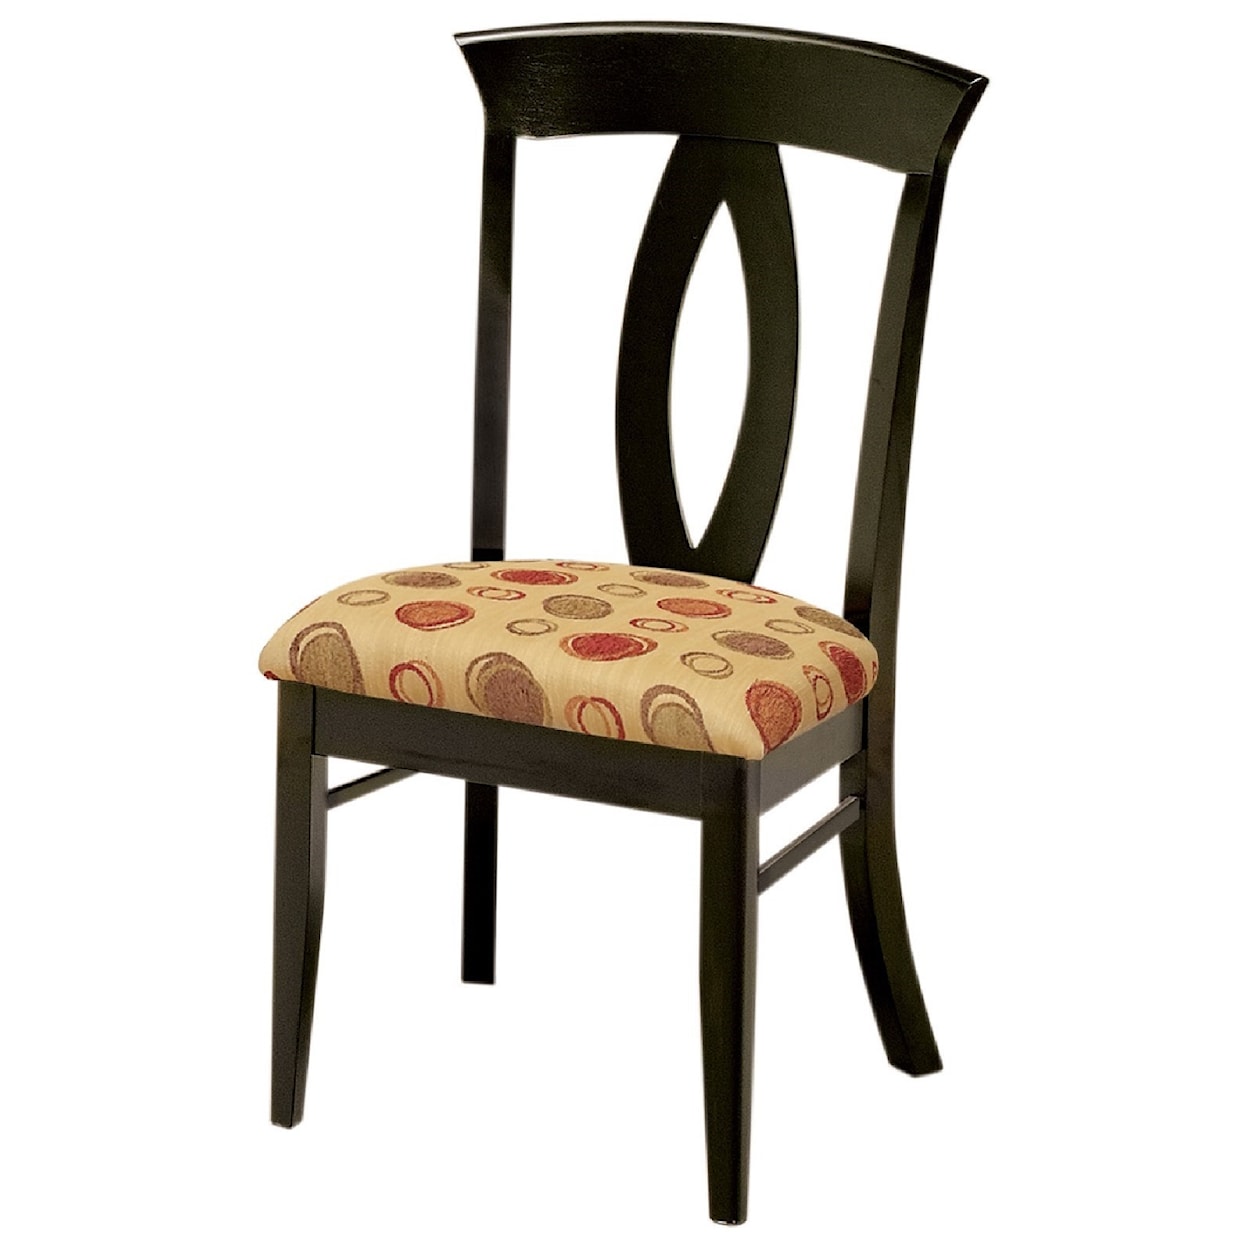 F&N Woodworking Brookfield Side Chair - Fabric Seat